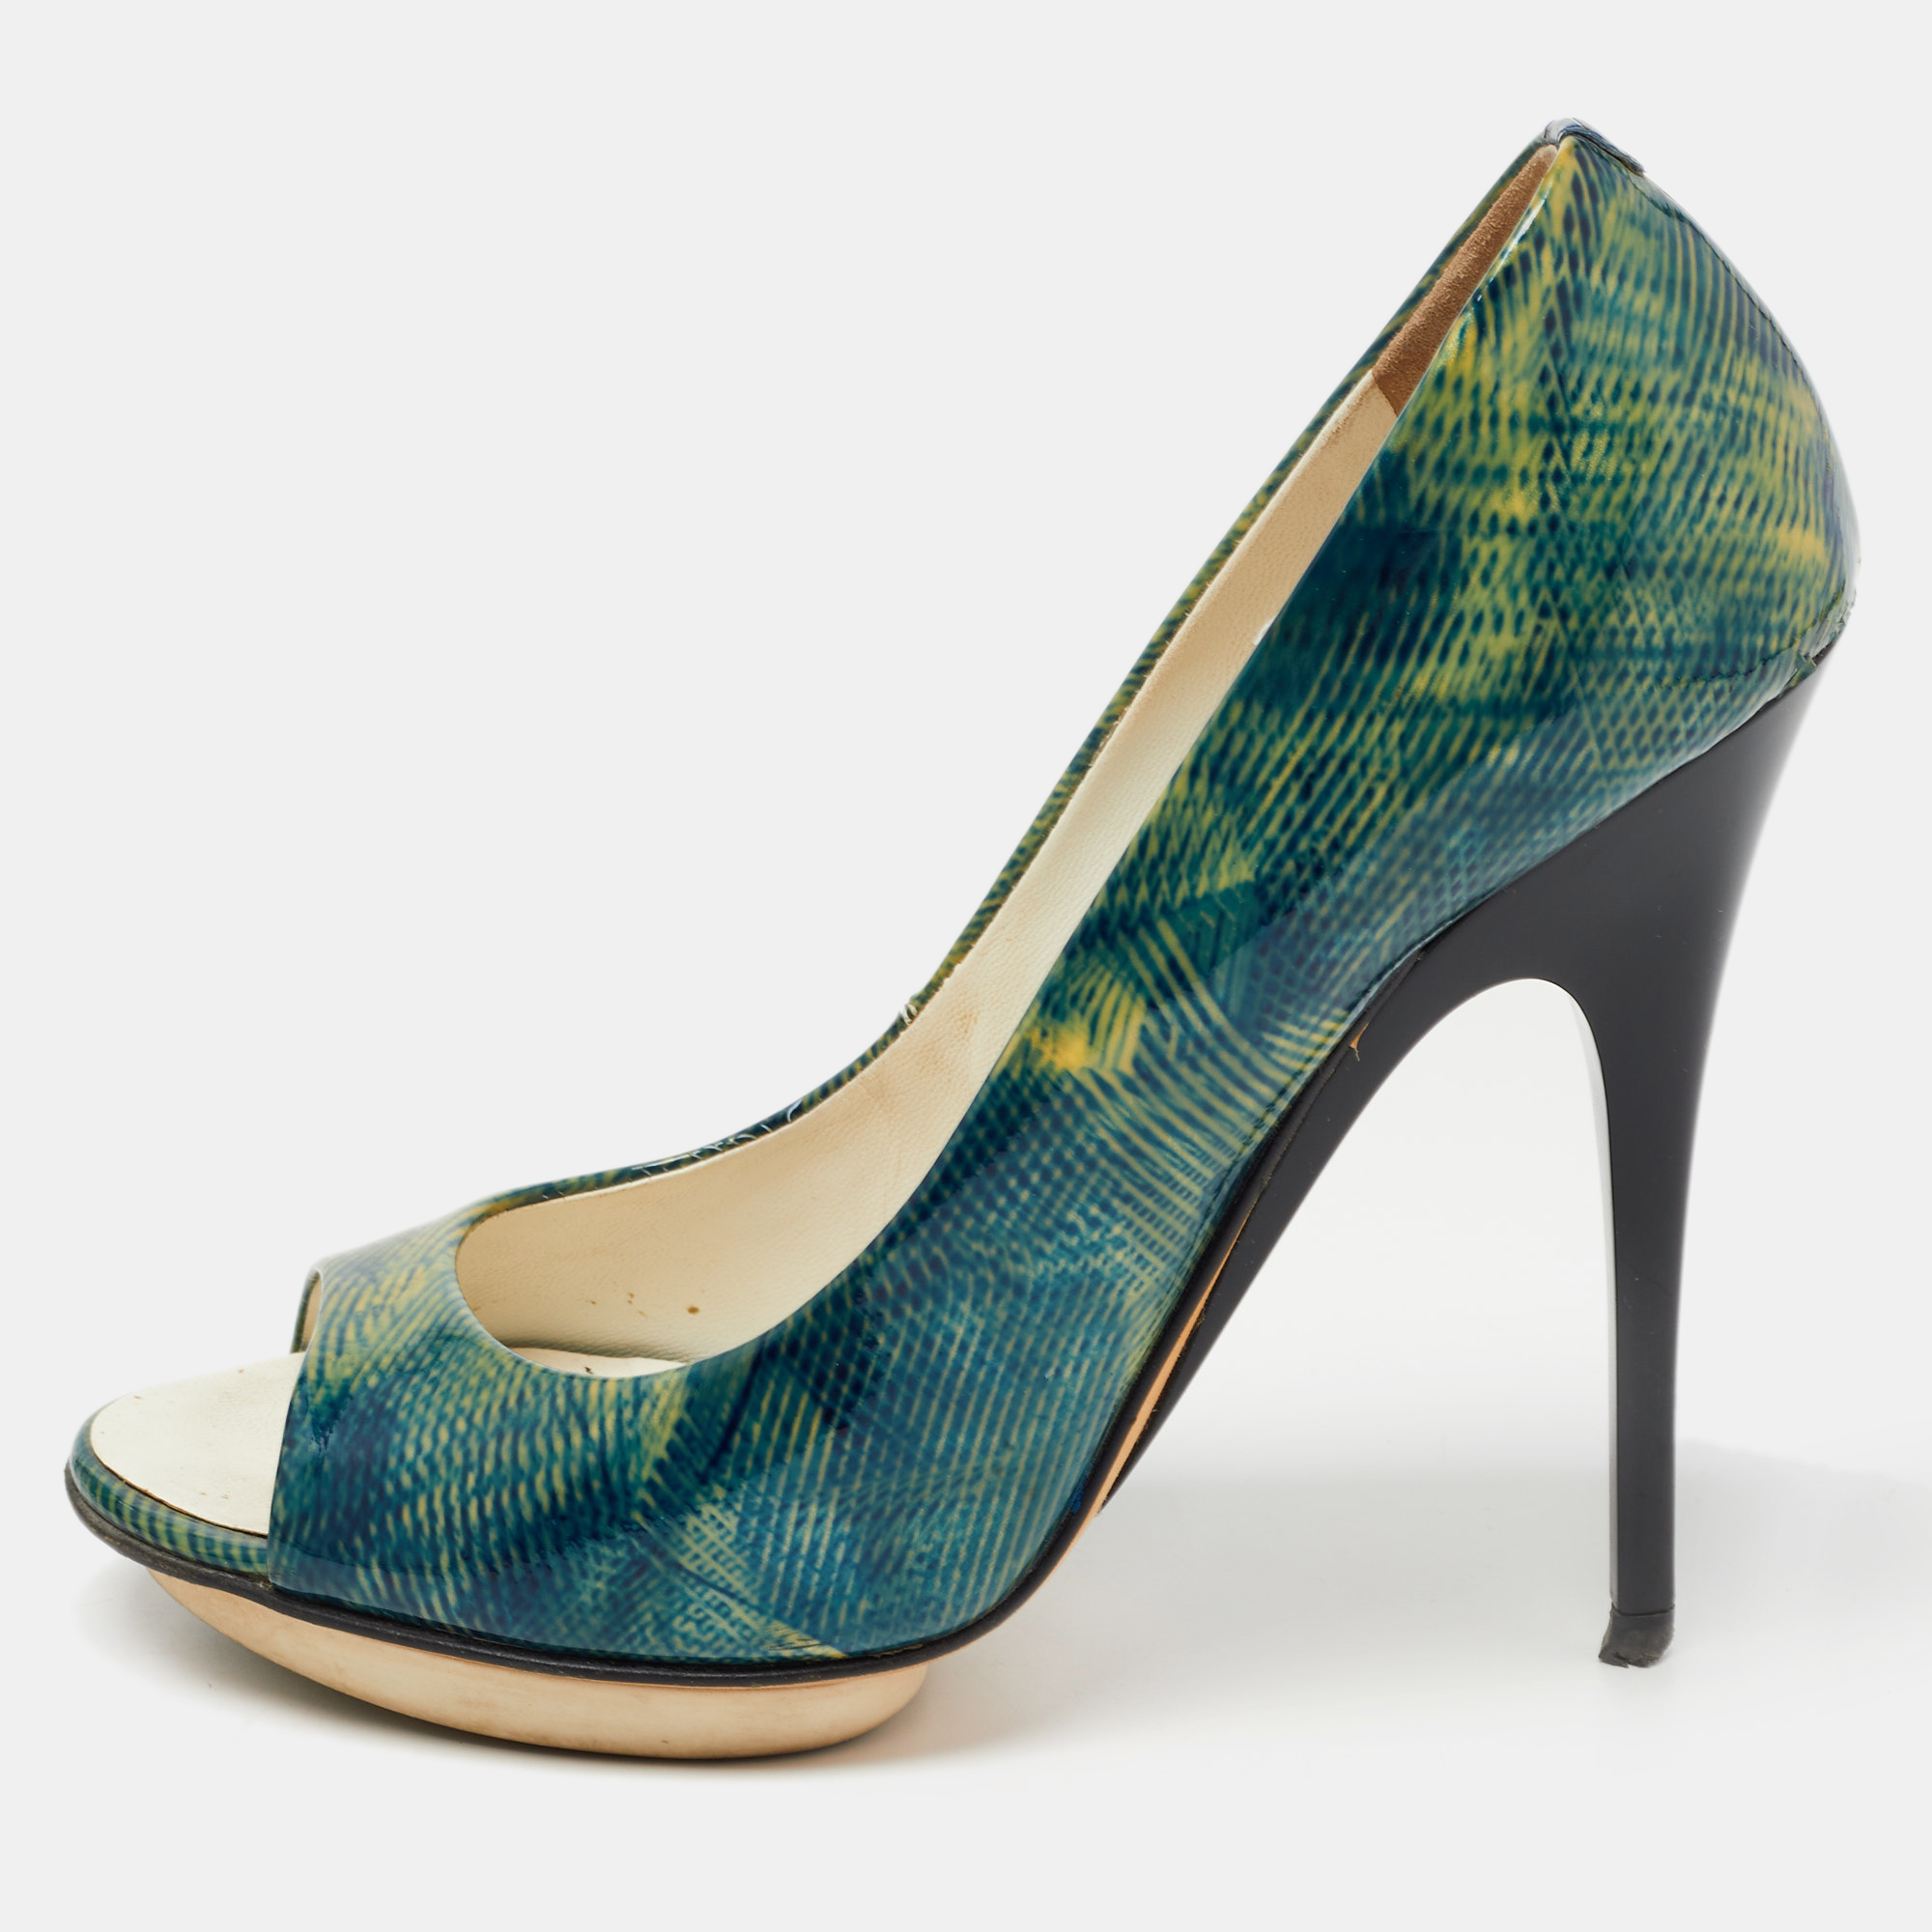 Pre-owned Giuseppe Zanotti Green Printed Patent Leather Peep Toe Pumps Size 36